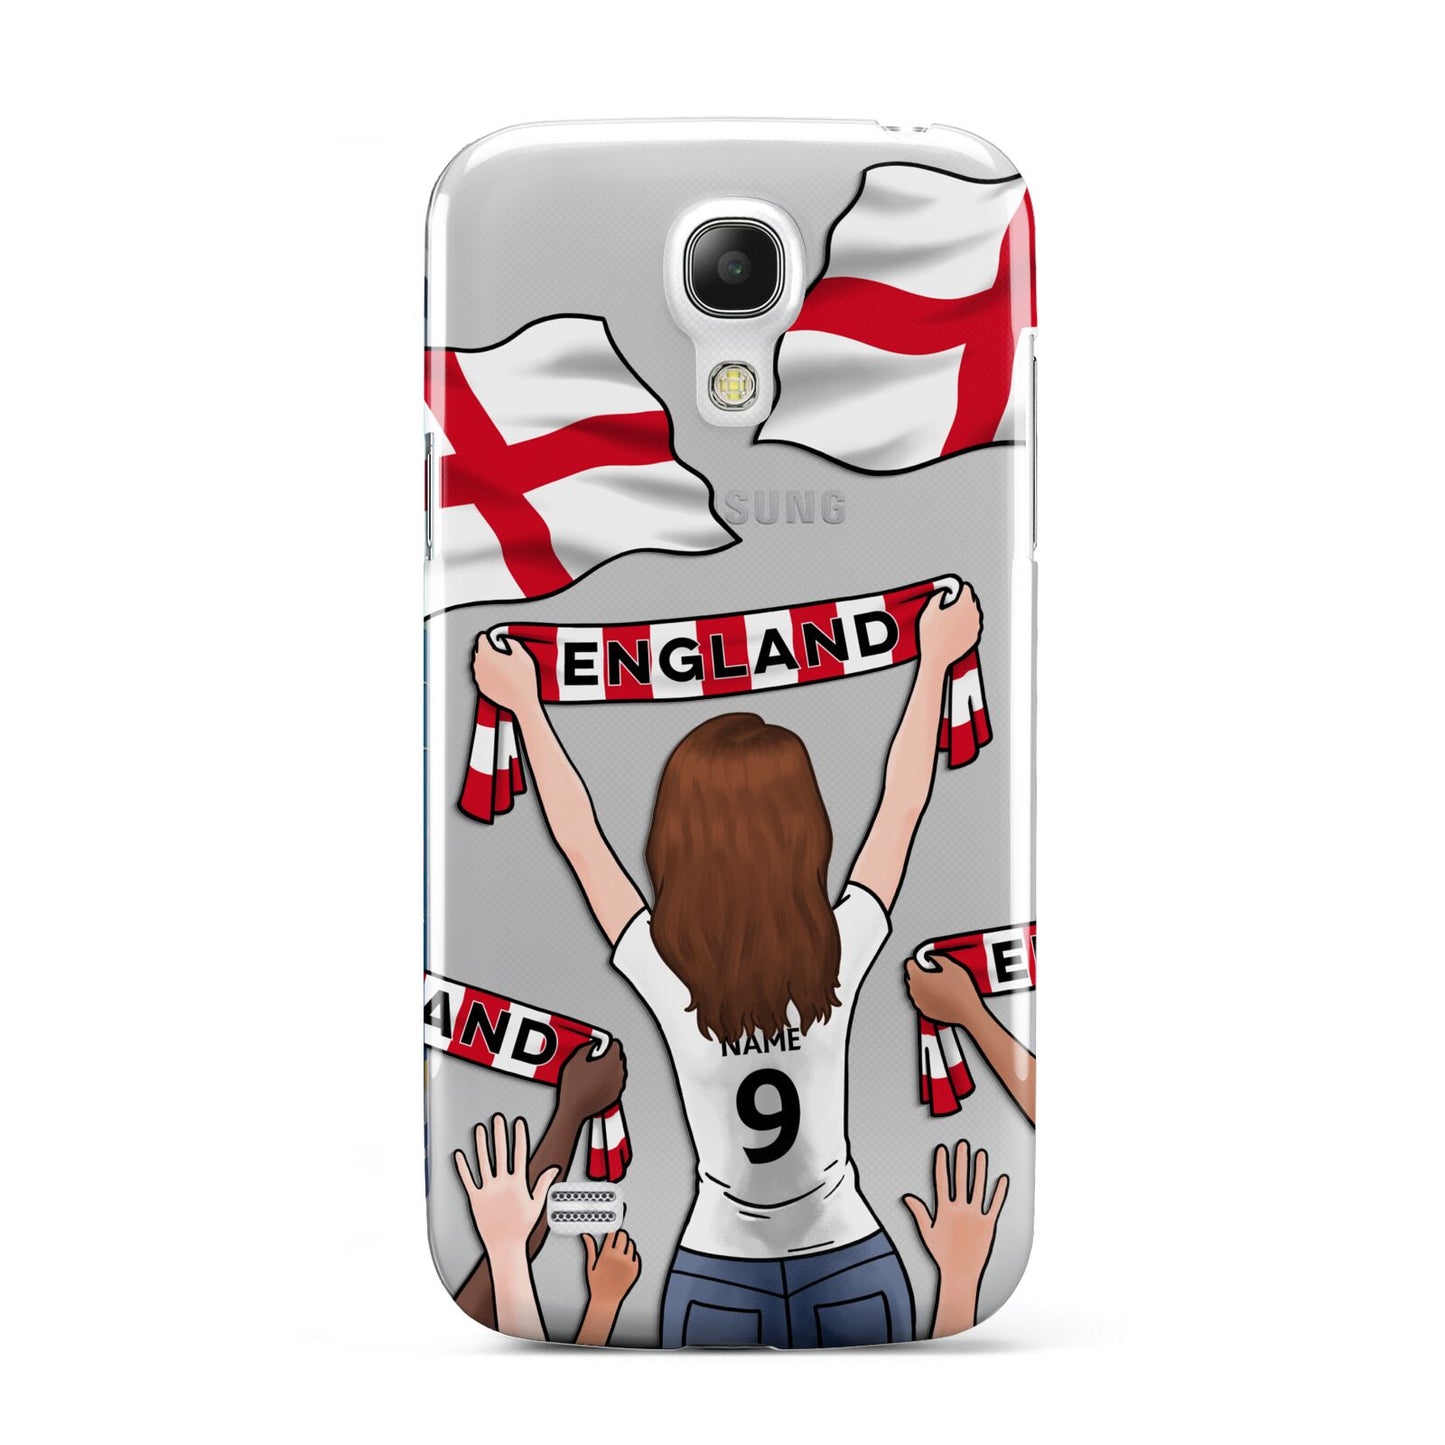 Football Supporter Personalised Samsung Galaxy S4 Mini Case